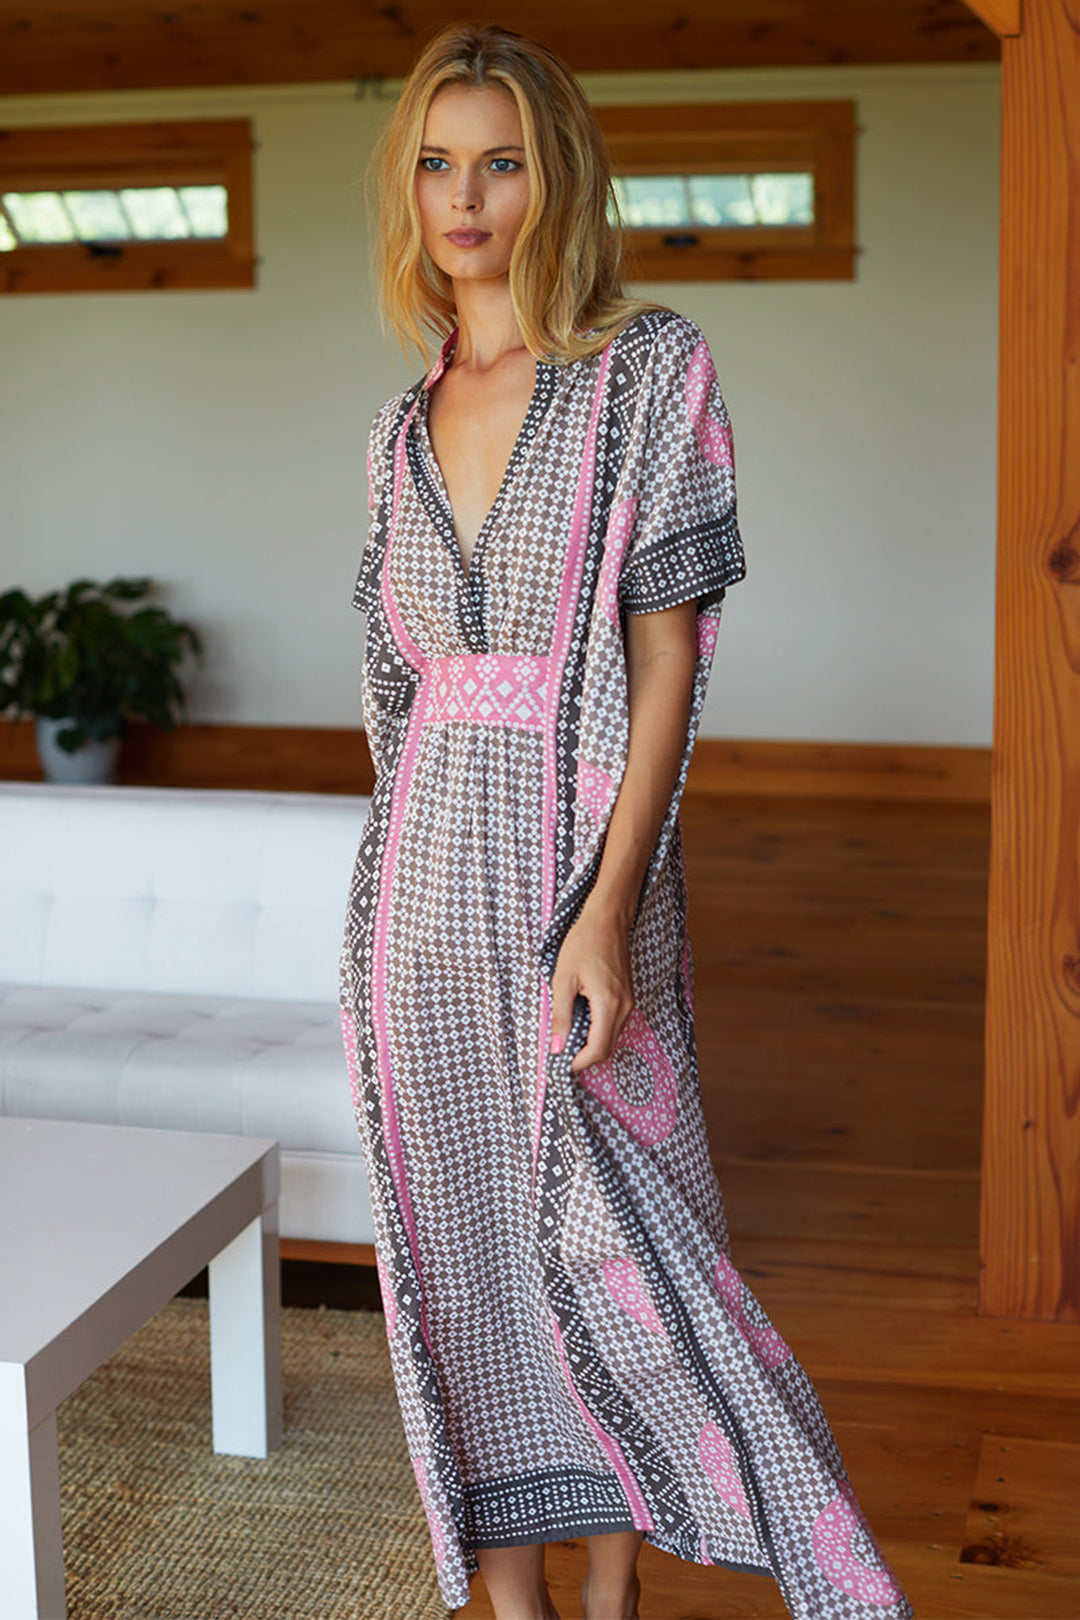 Emerson Fry Emerson Caftan beach cover-up in Rhodolite Organic pink and mauve print at Inner Beach Co, Toronto, Canada